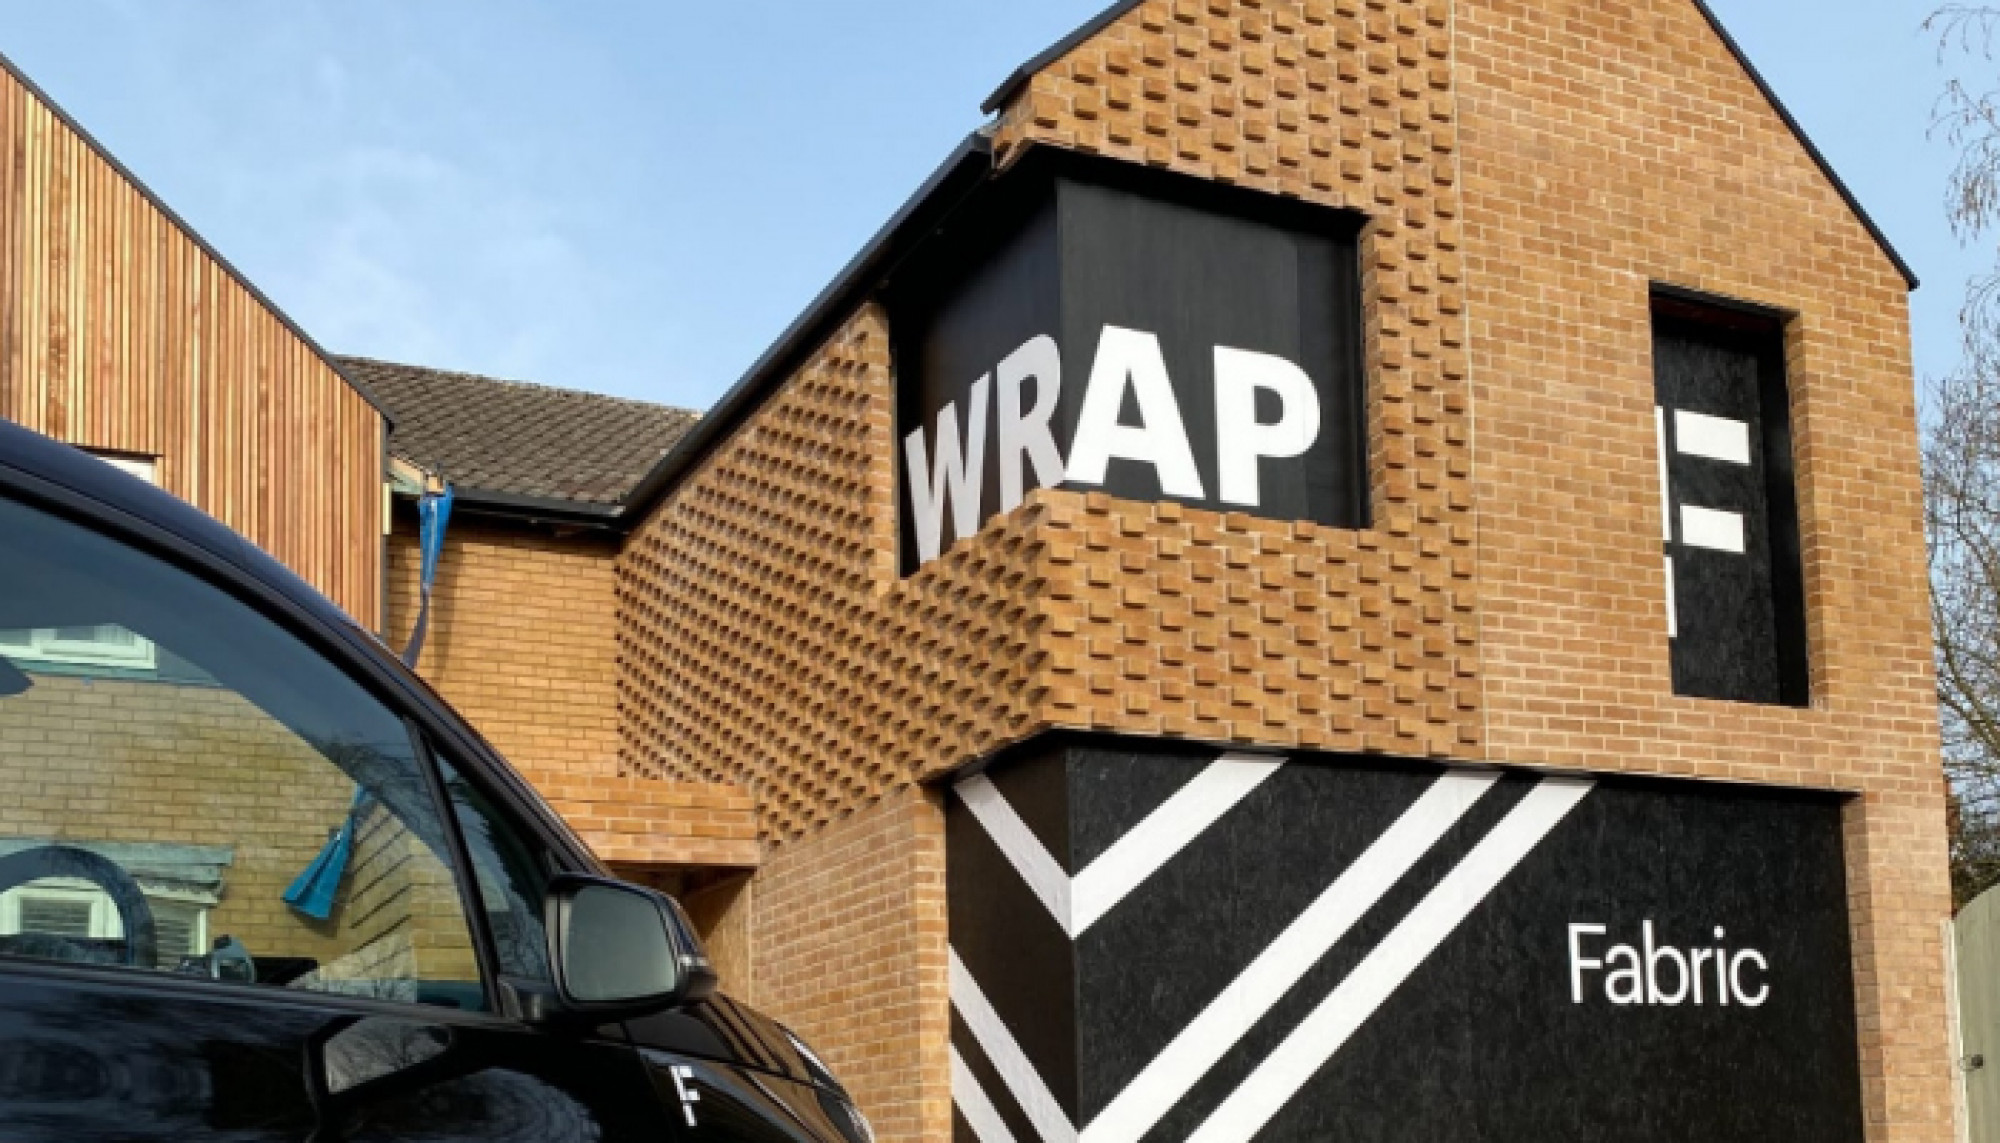 Introducing: The Wrap